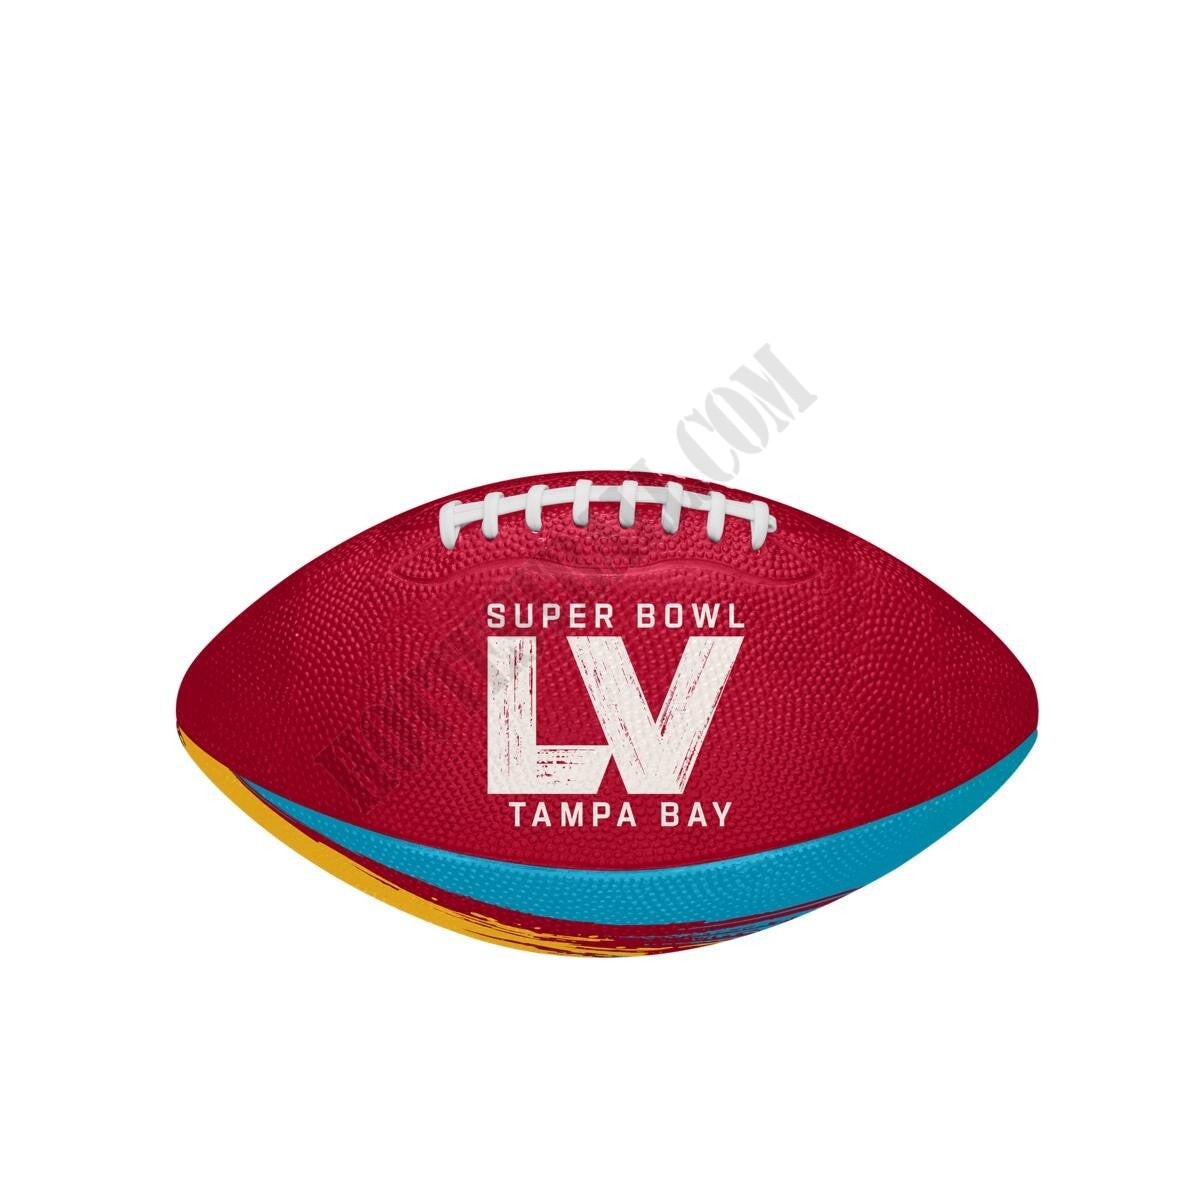 Super Bowl LV Junior All-Weather Football ● Wilson Promotions - -0